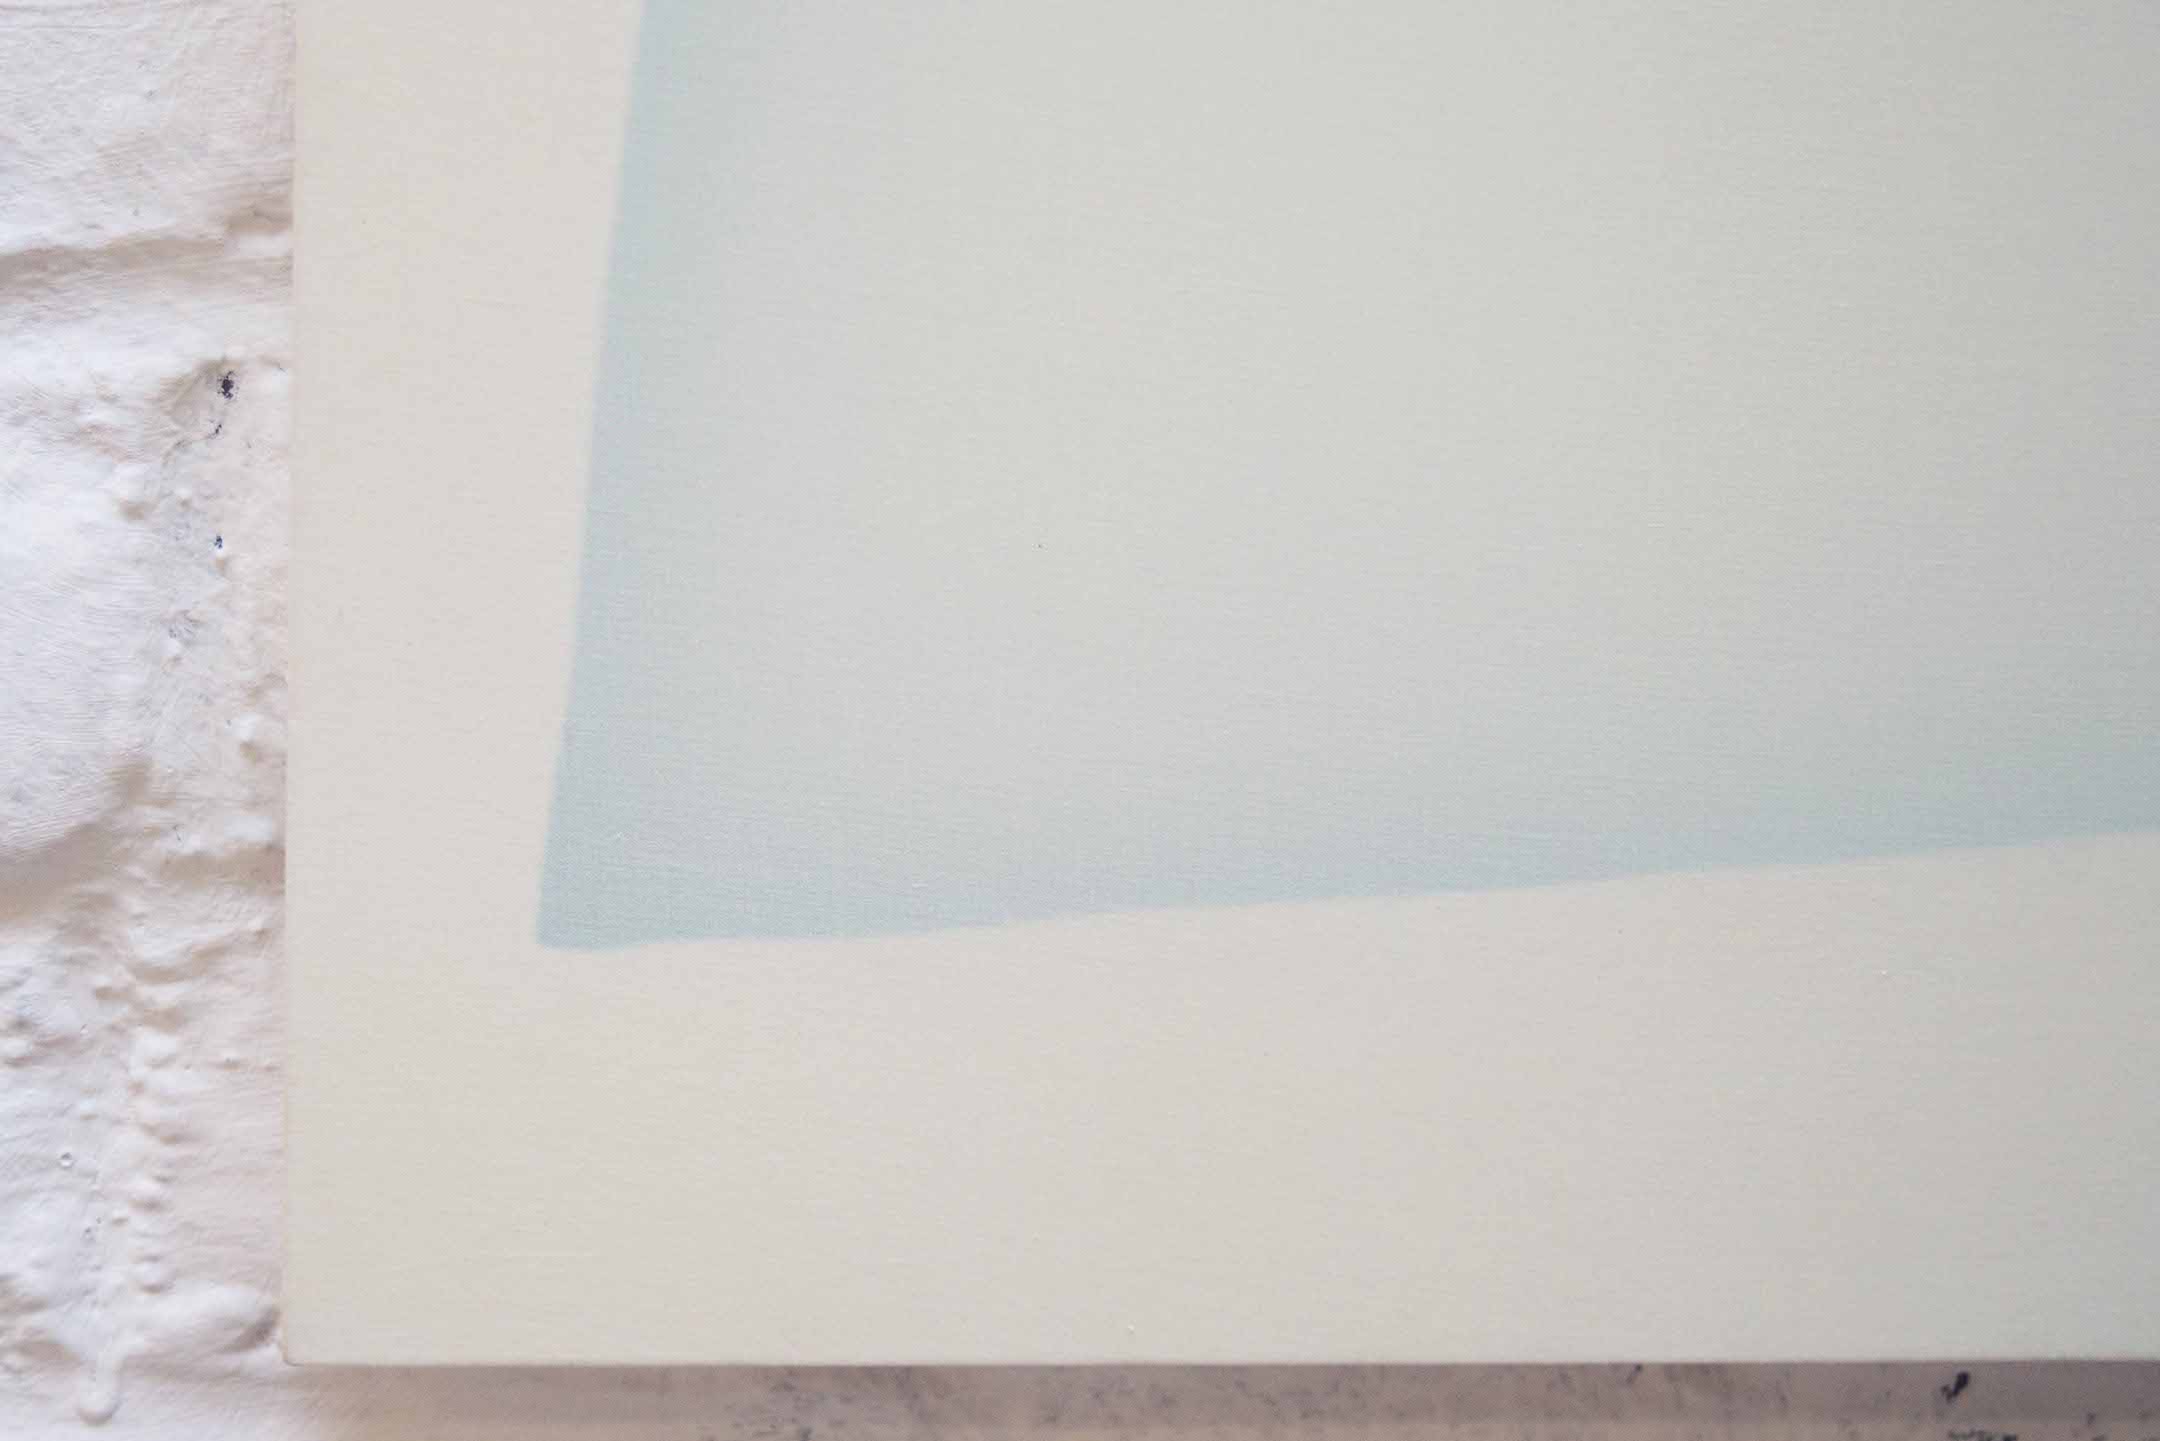 Pale blue rectangle gently blending into a white background